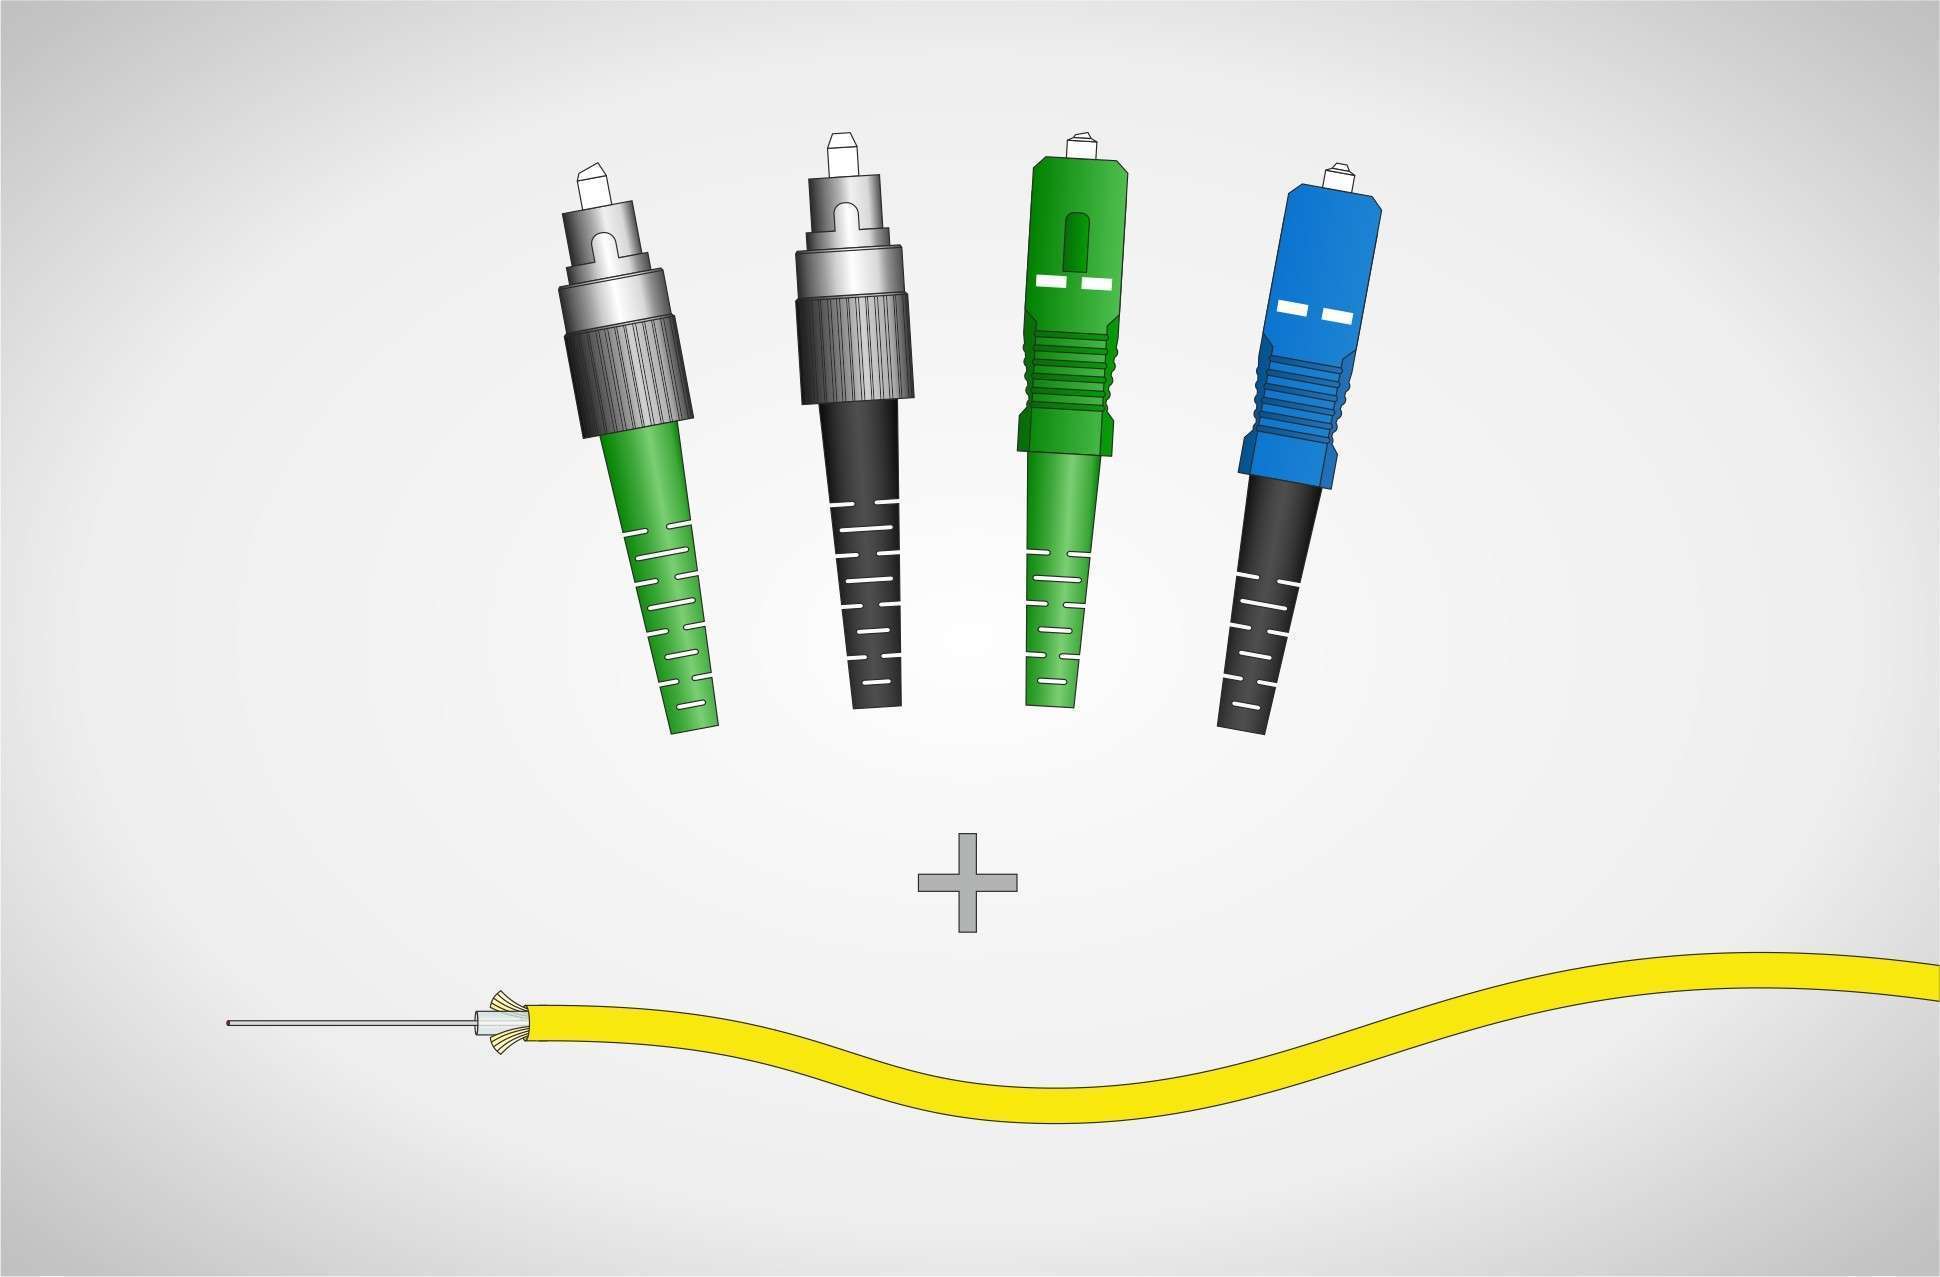 Configurable patch cable with Kevlar-reinforced tubing and a diameter of 3 mm